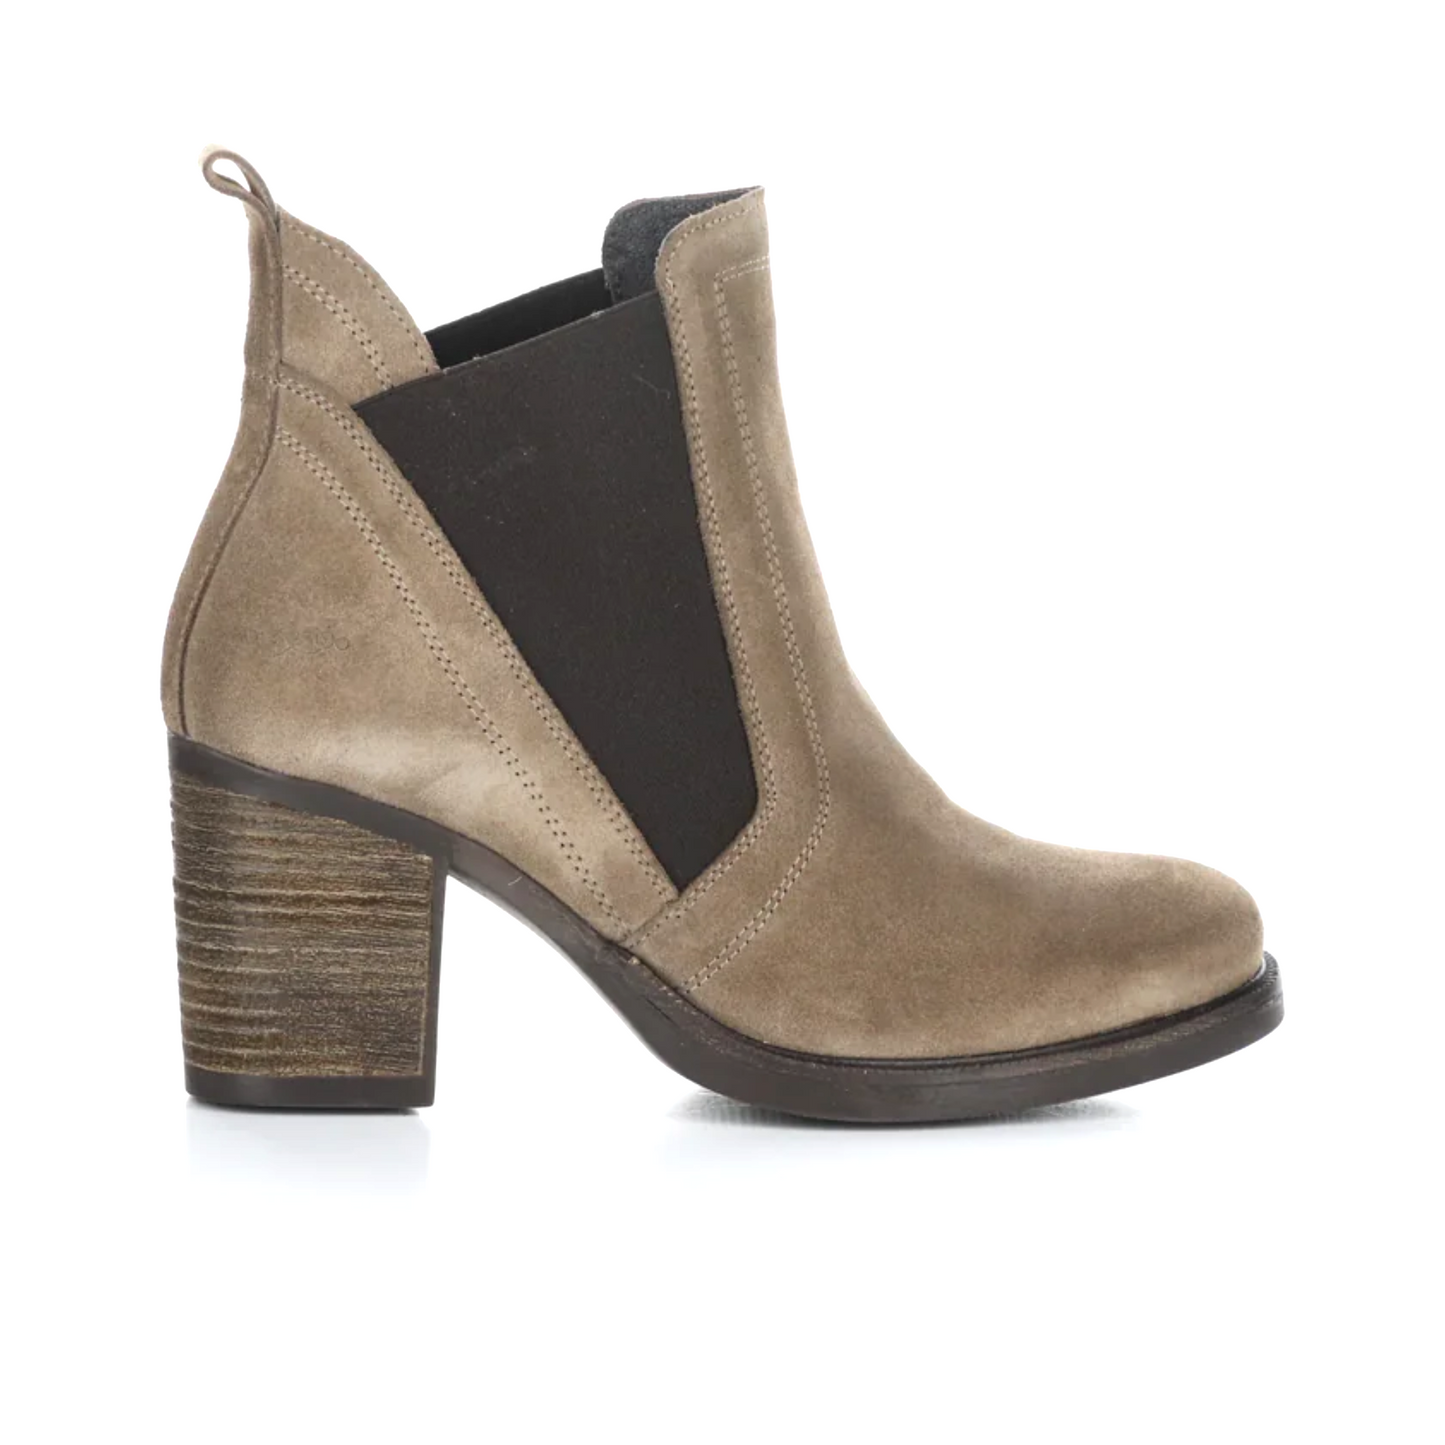 BOS AND CO BELLINI BOOT WOMEN